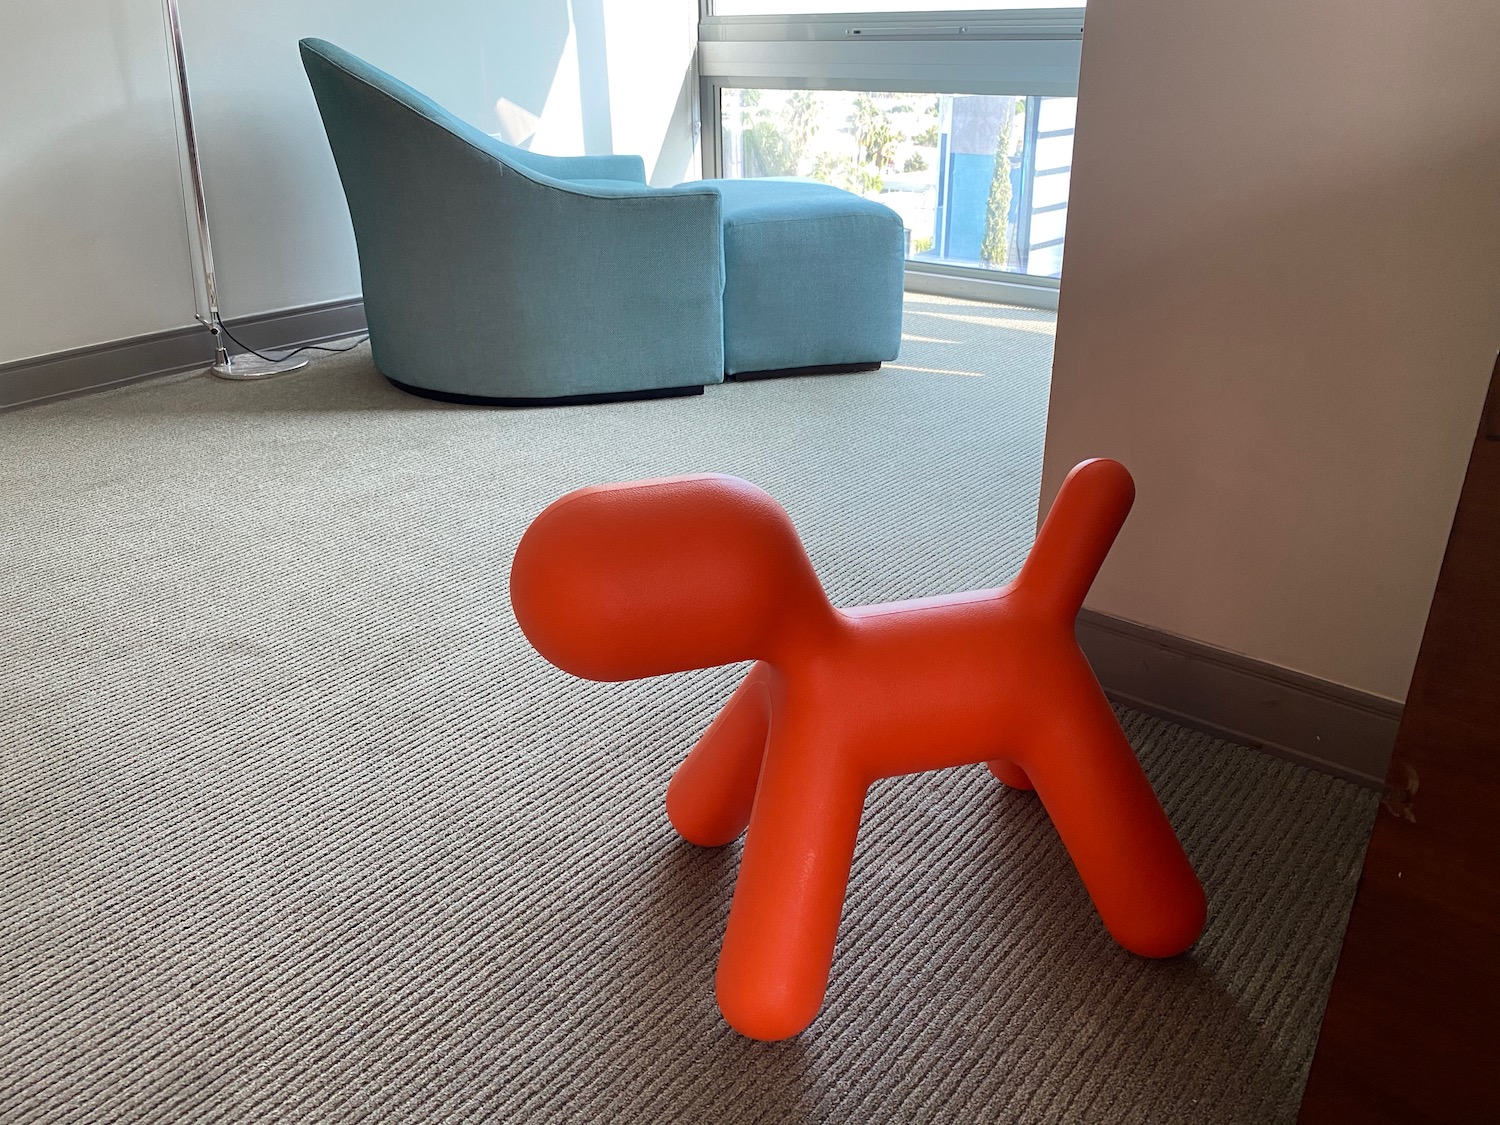 a red balloon dog on carpet